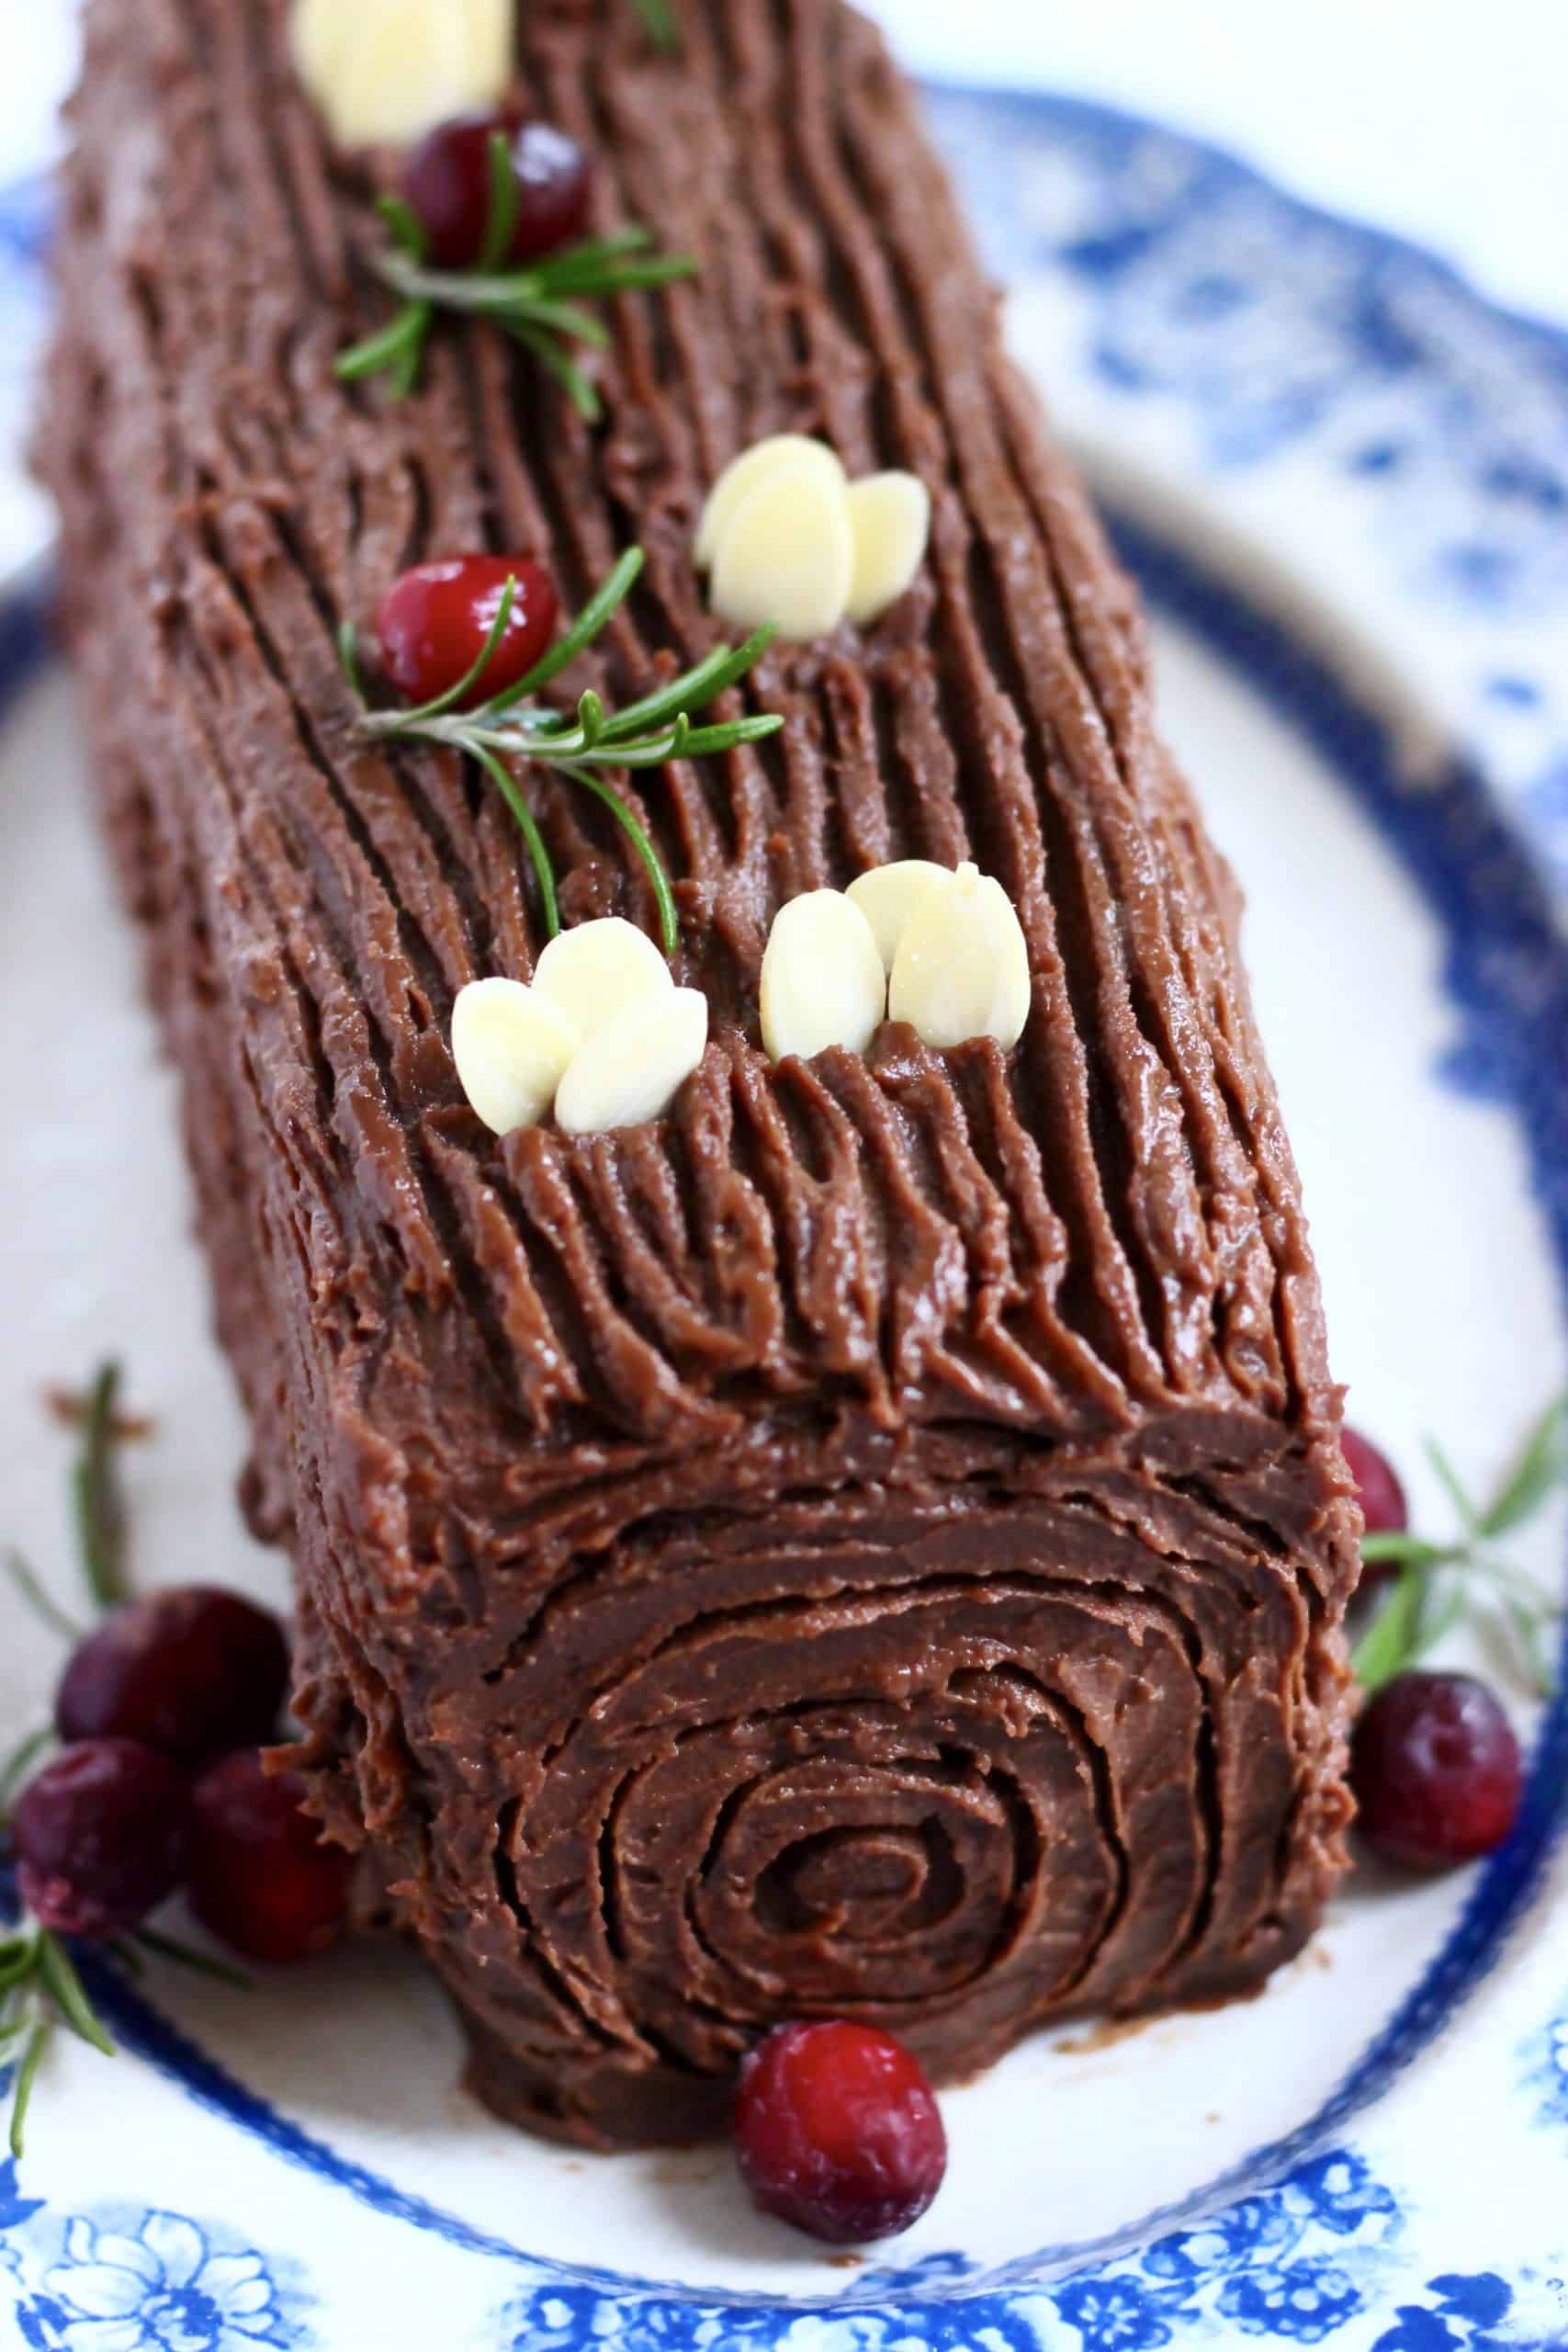 A gluten-free vegan yule log decorated with cranberries, rosemary and flaked almonds